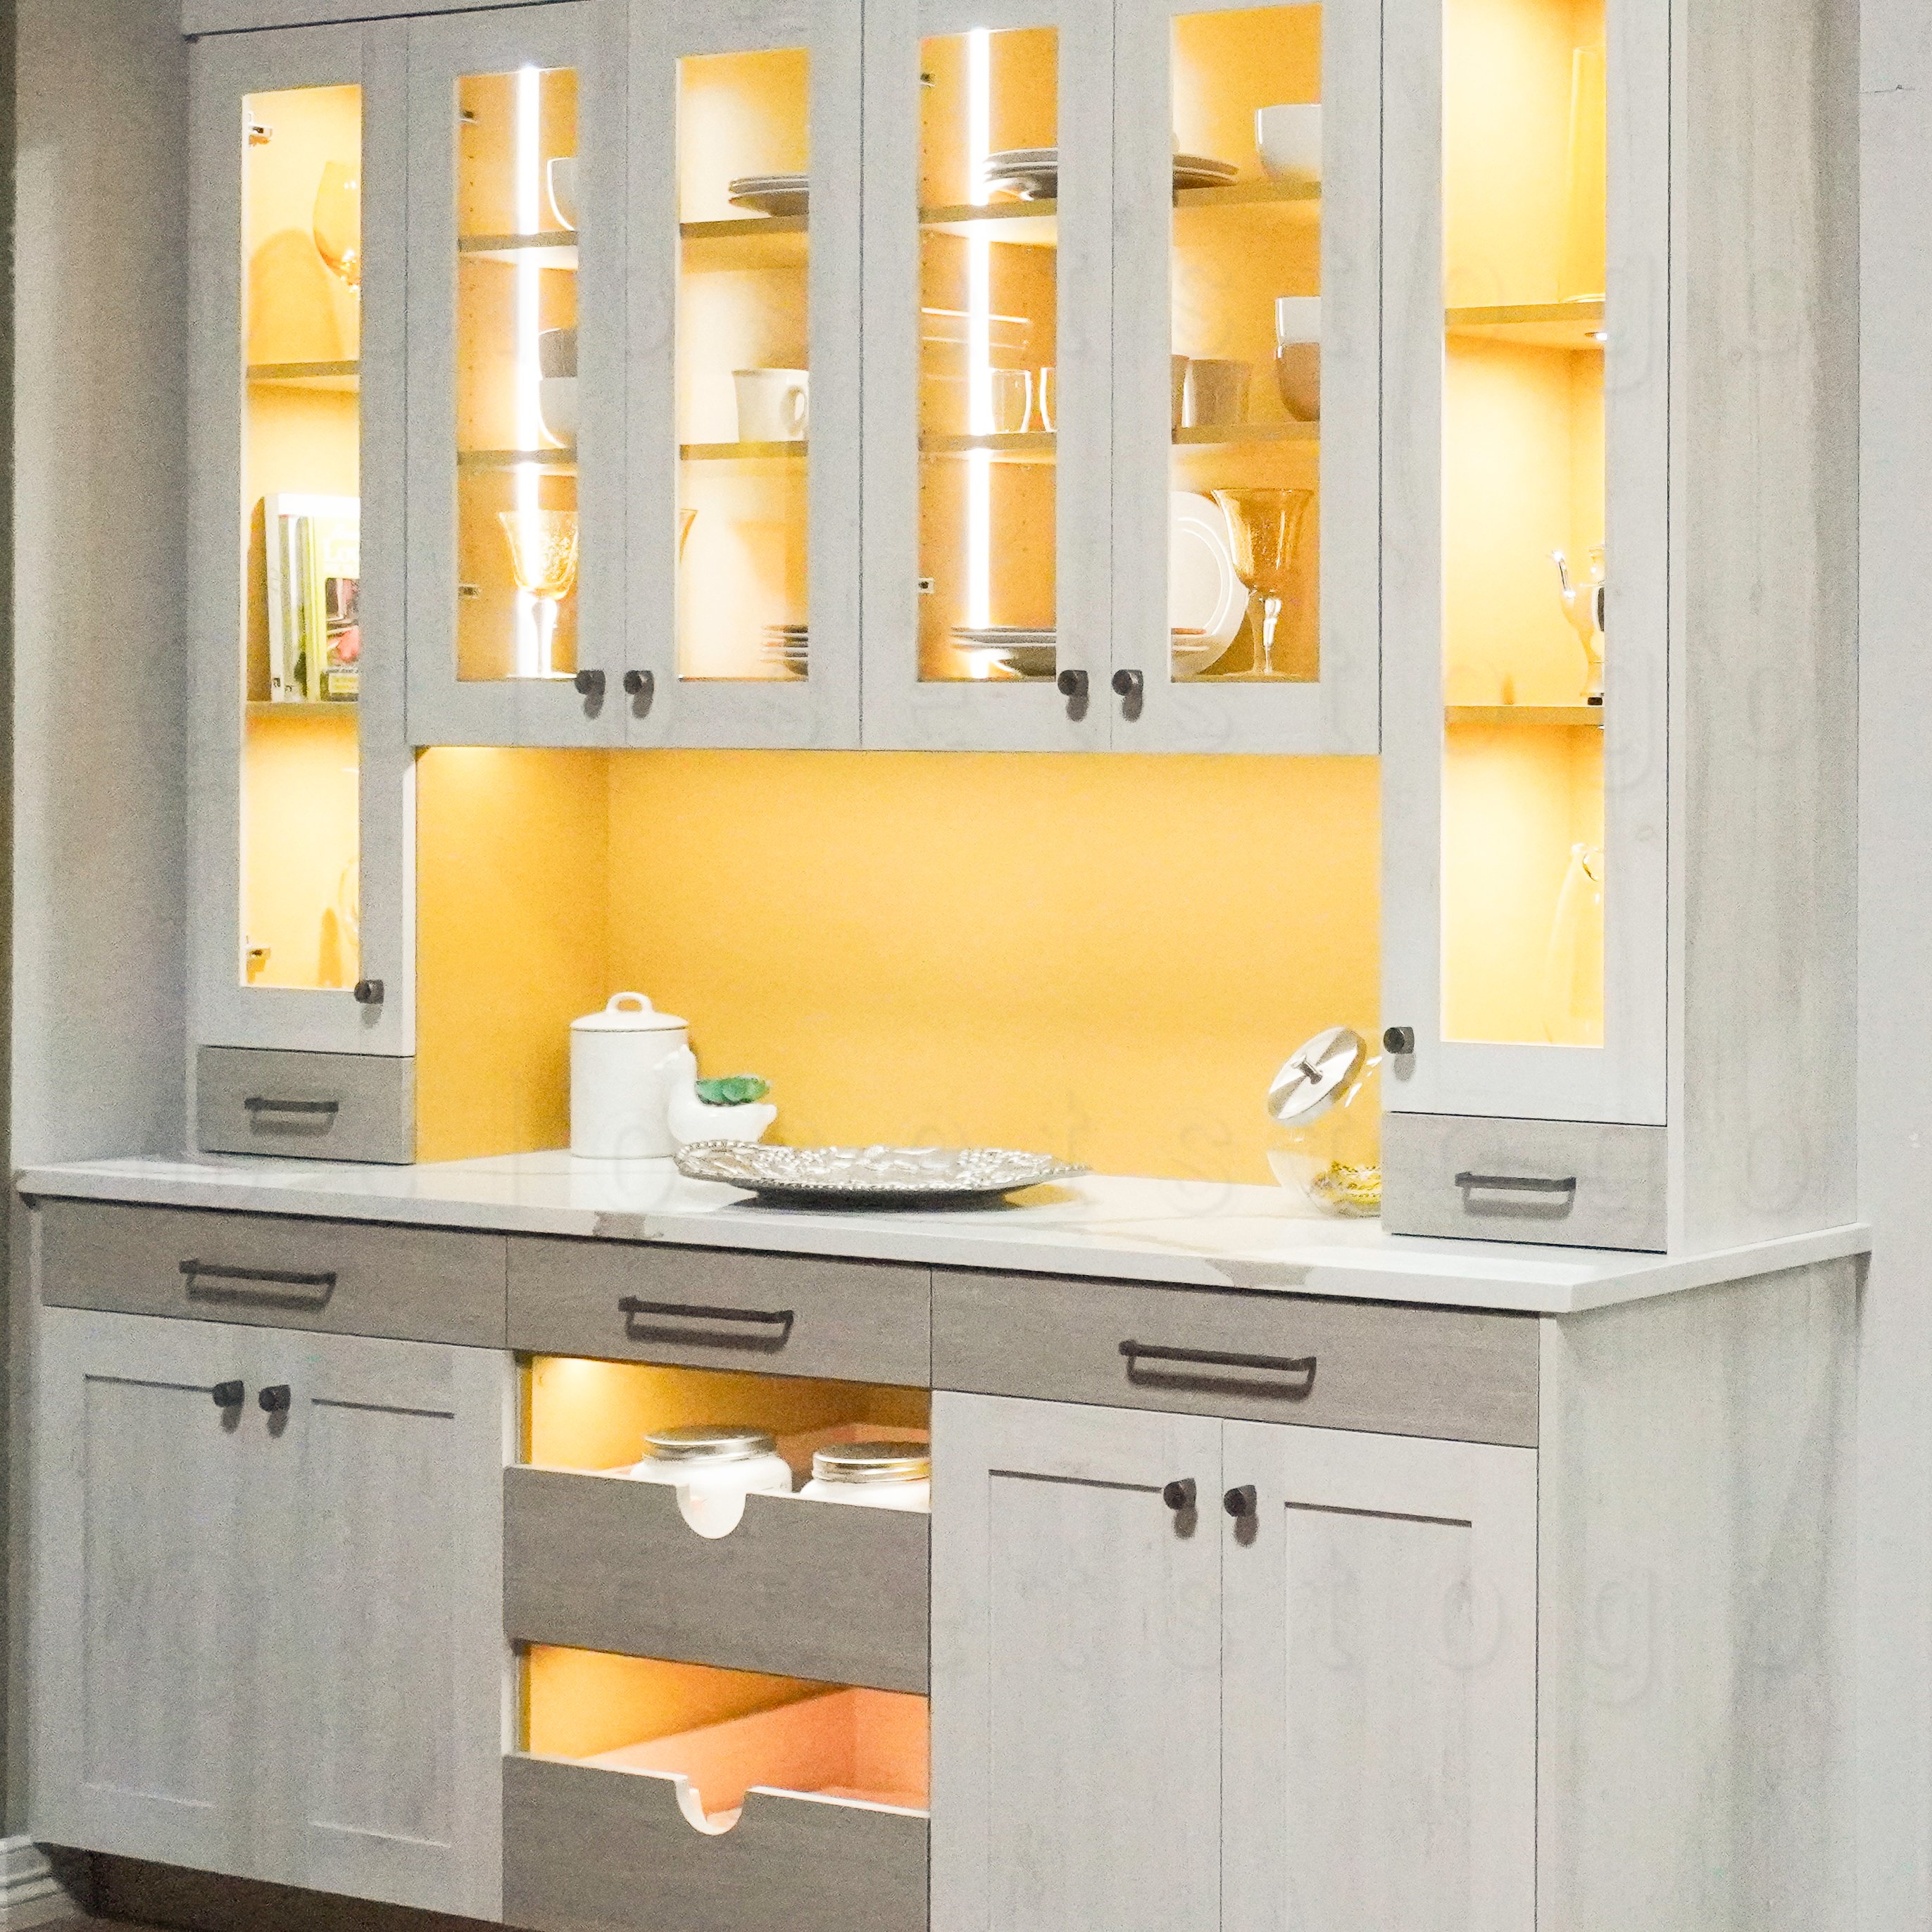 Side view of this two toned butler pantry